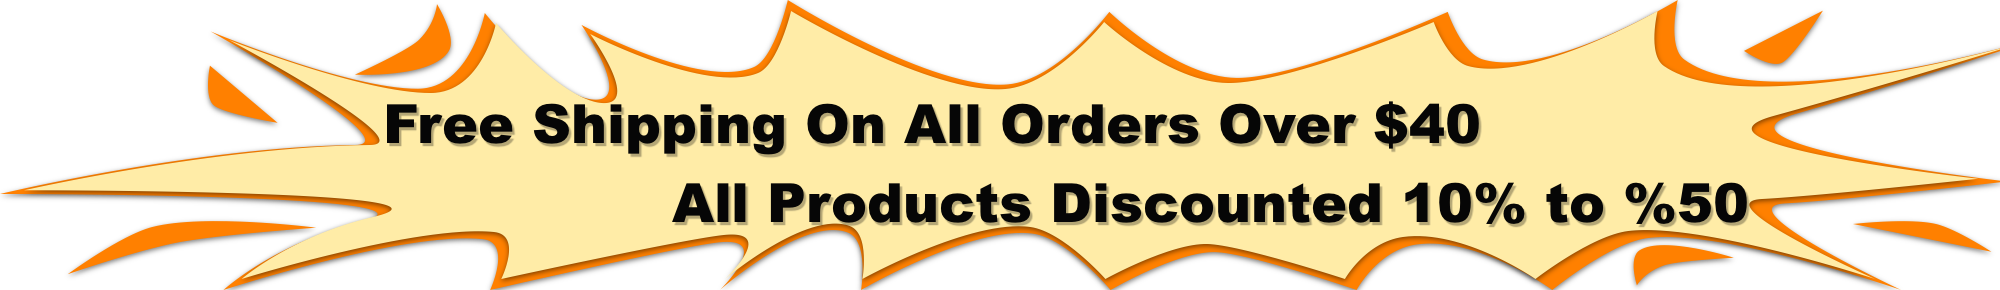 Free Shipping on All Orders Over $40 - All Products Discounted 10% to 50%